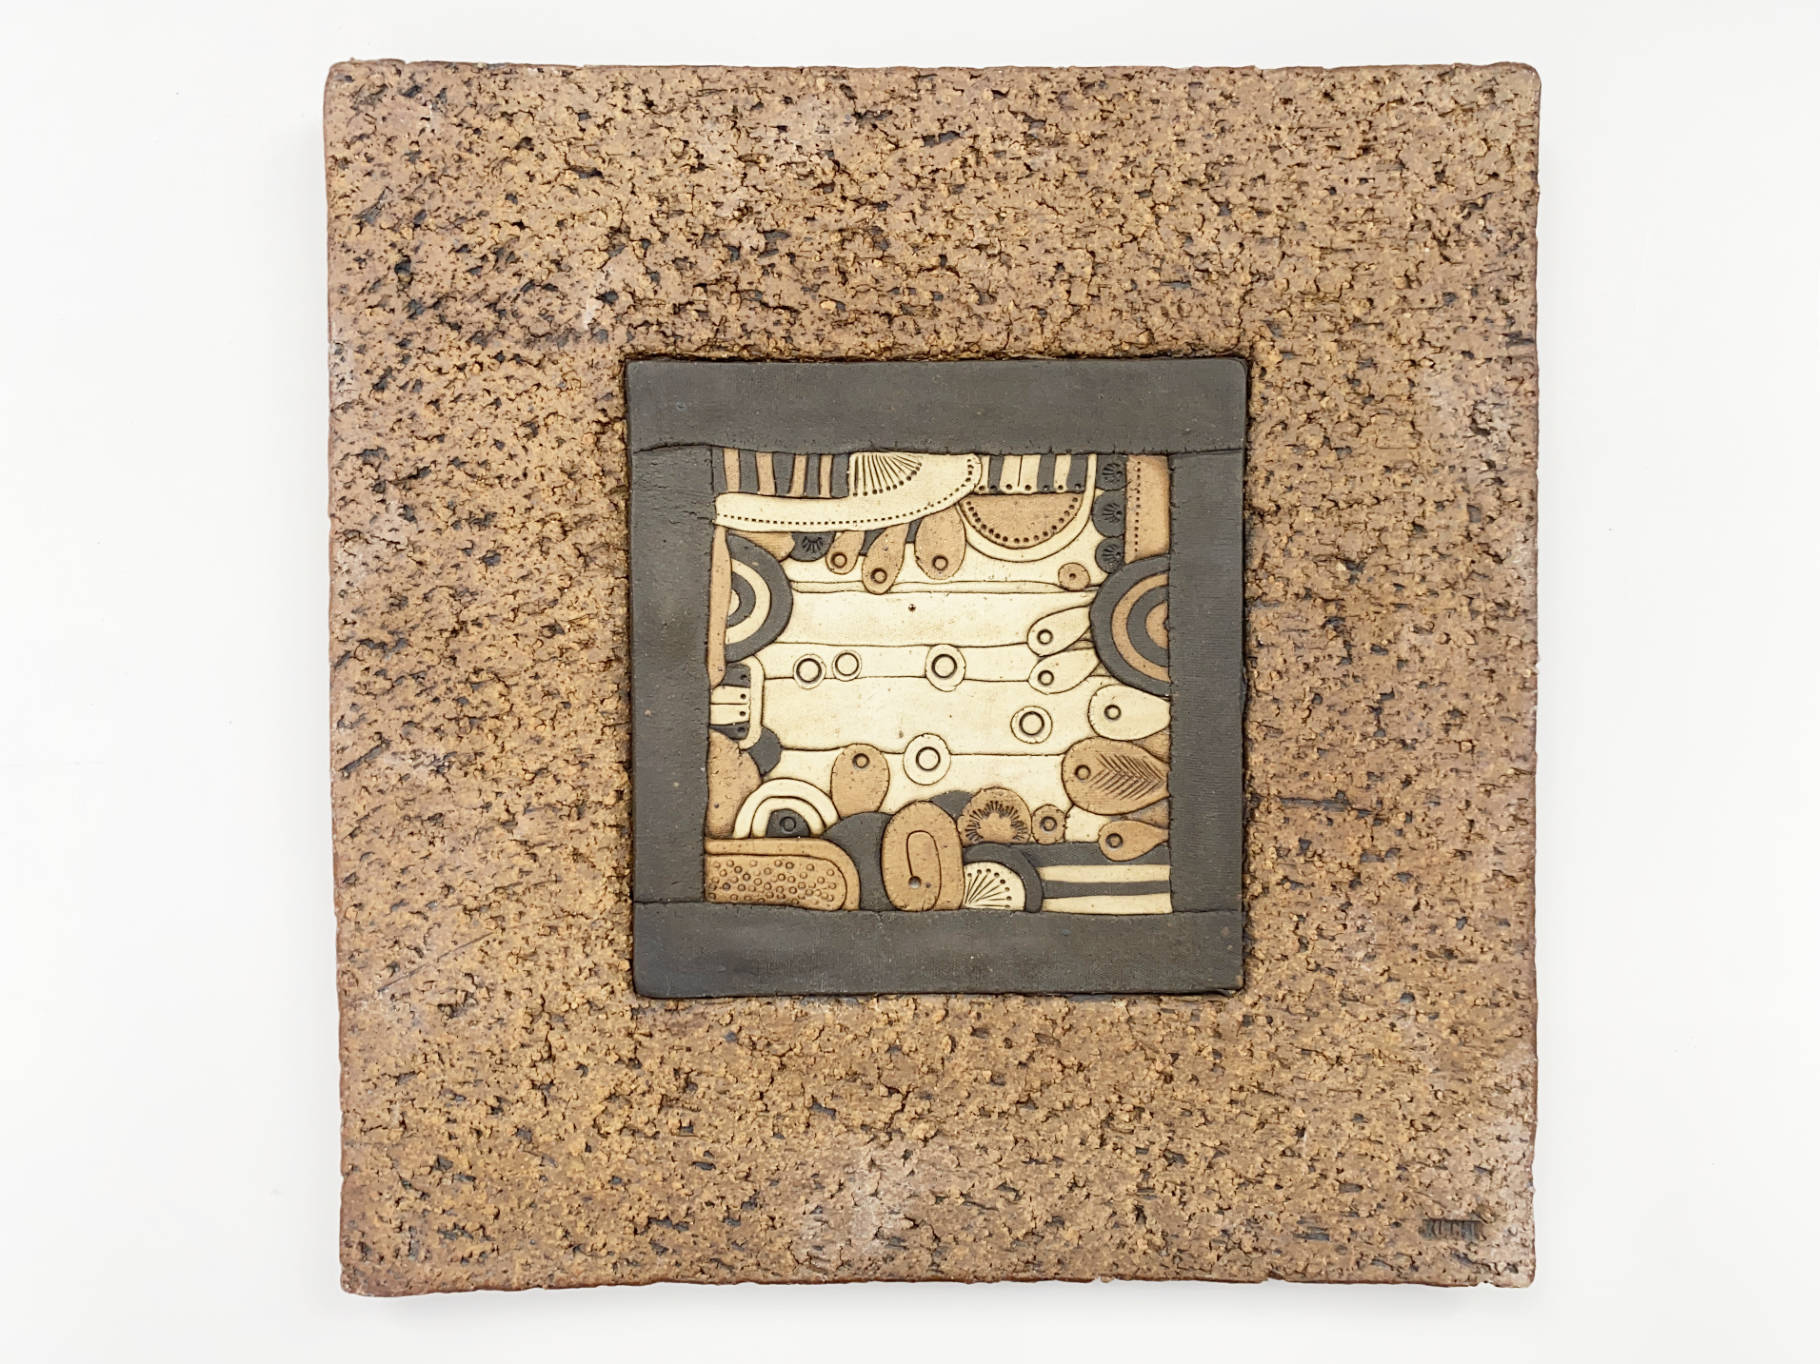 Wall Plate, Ceramic, Stoneware, Unique Piece, abstract Motif, Overmolding of different colored Clays, by Wilhelm & Elly Kuch, ca 1985